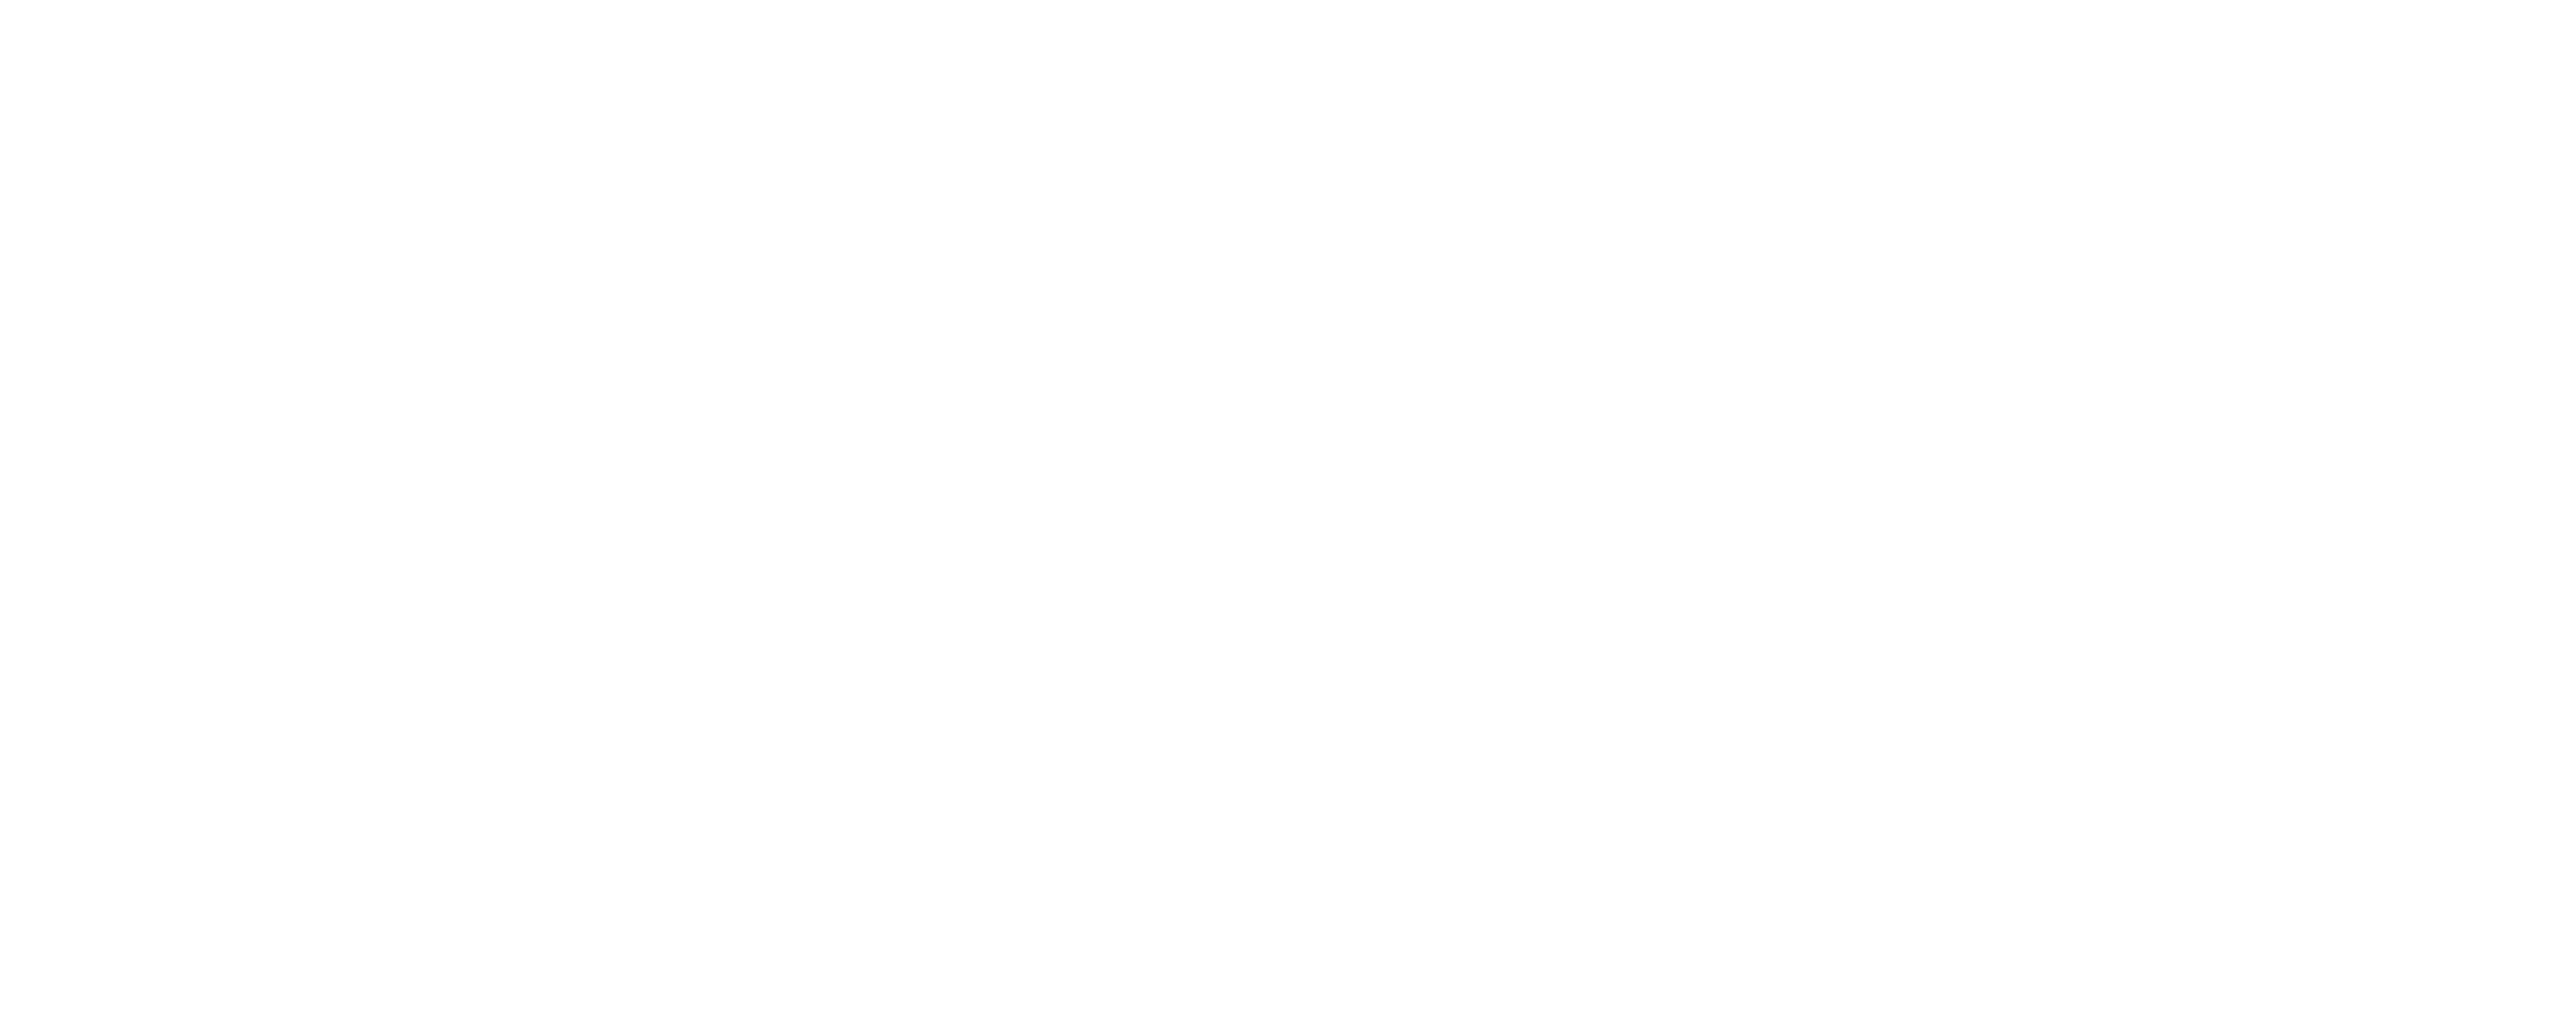 Safeguard Safety Shoes